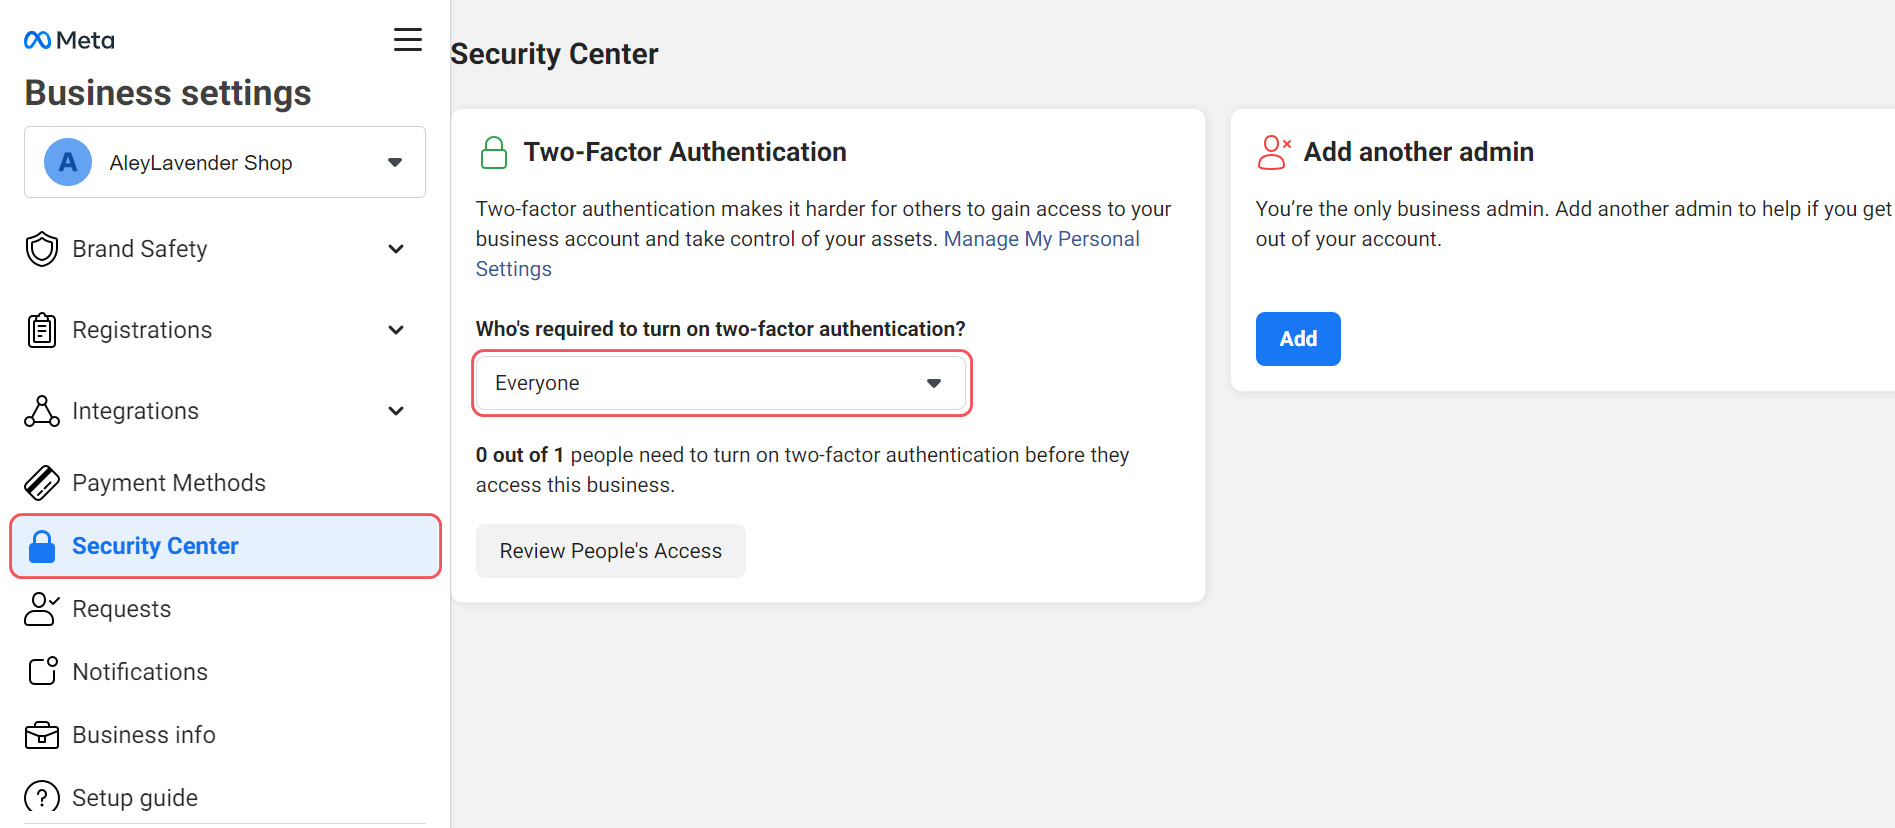 Move to “two-factor authentication” and set it as “Everyone”